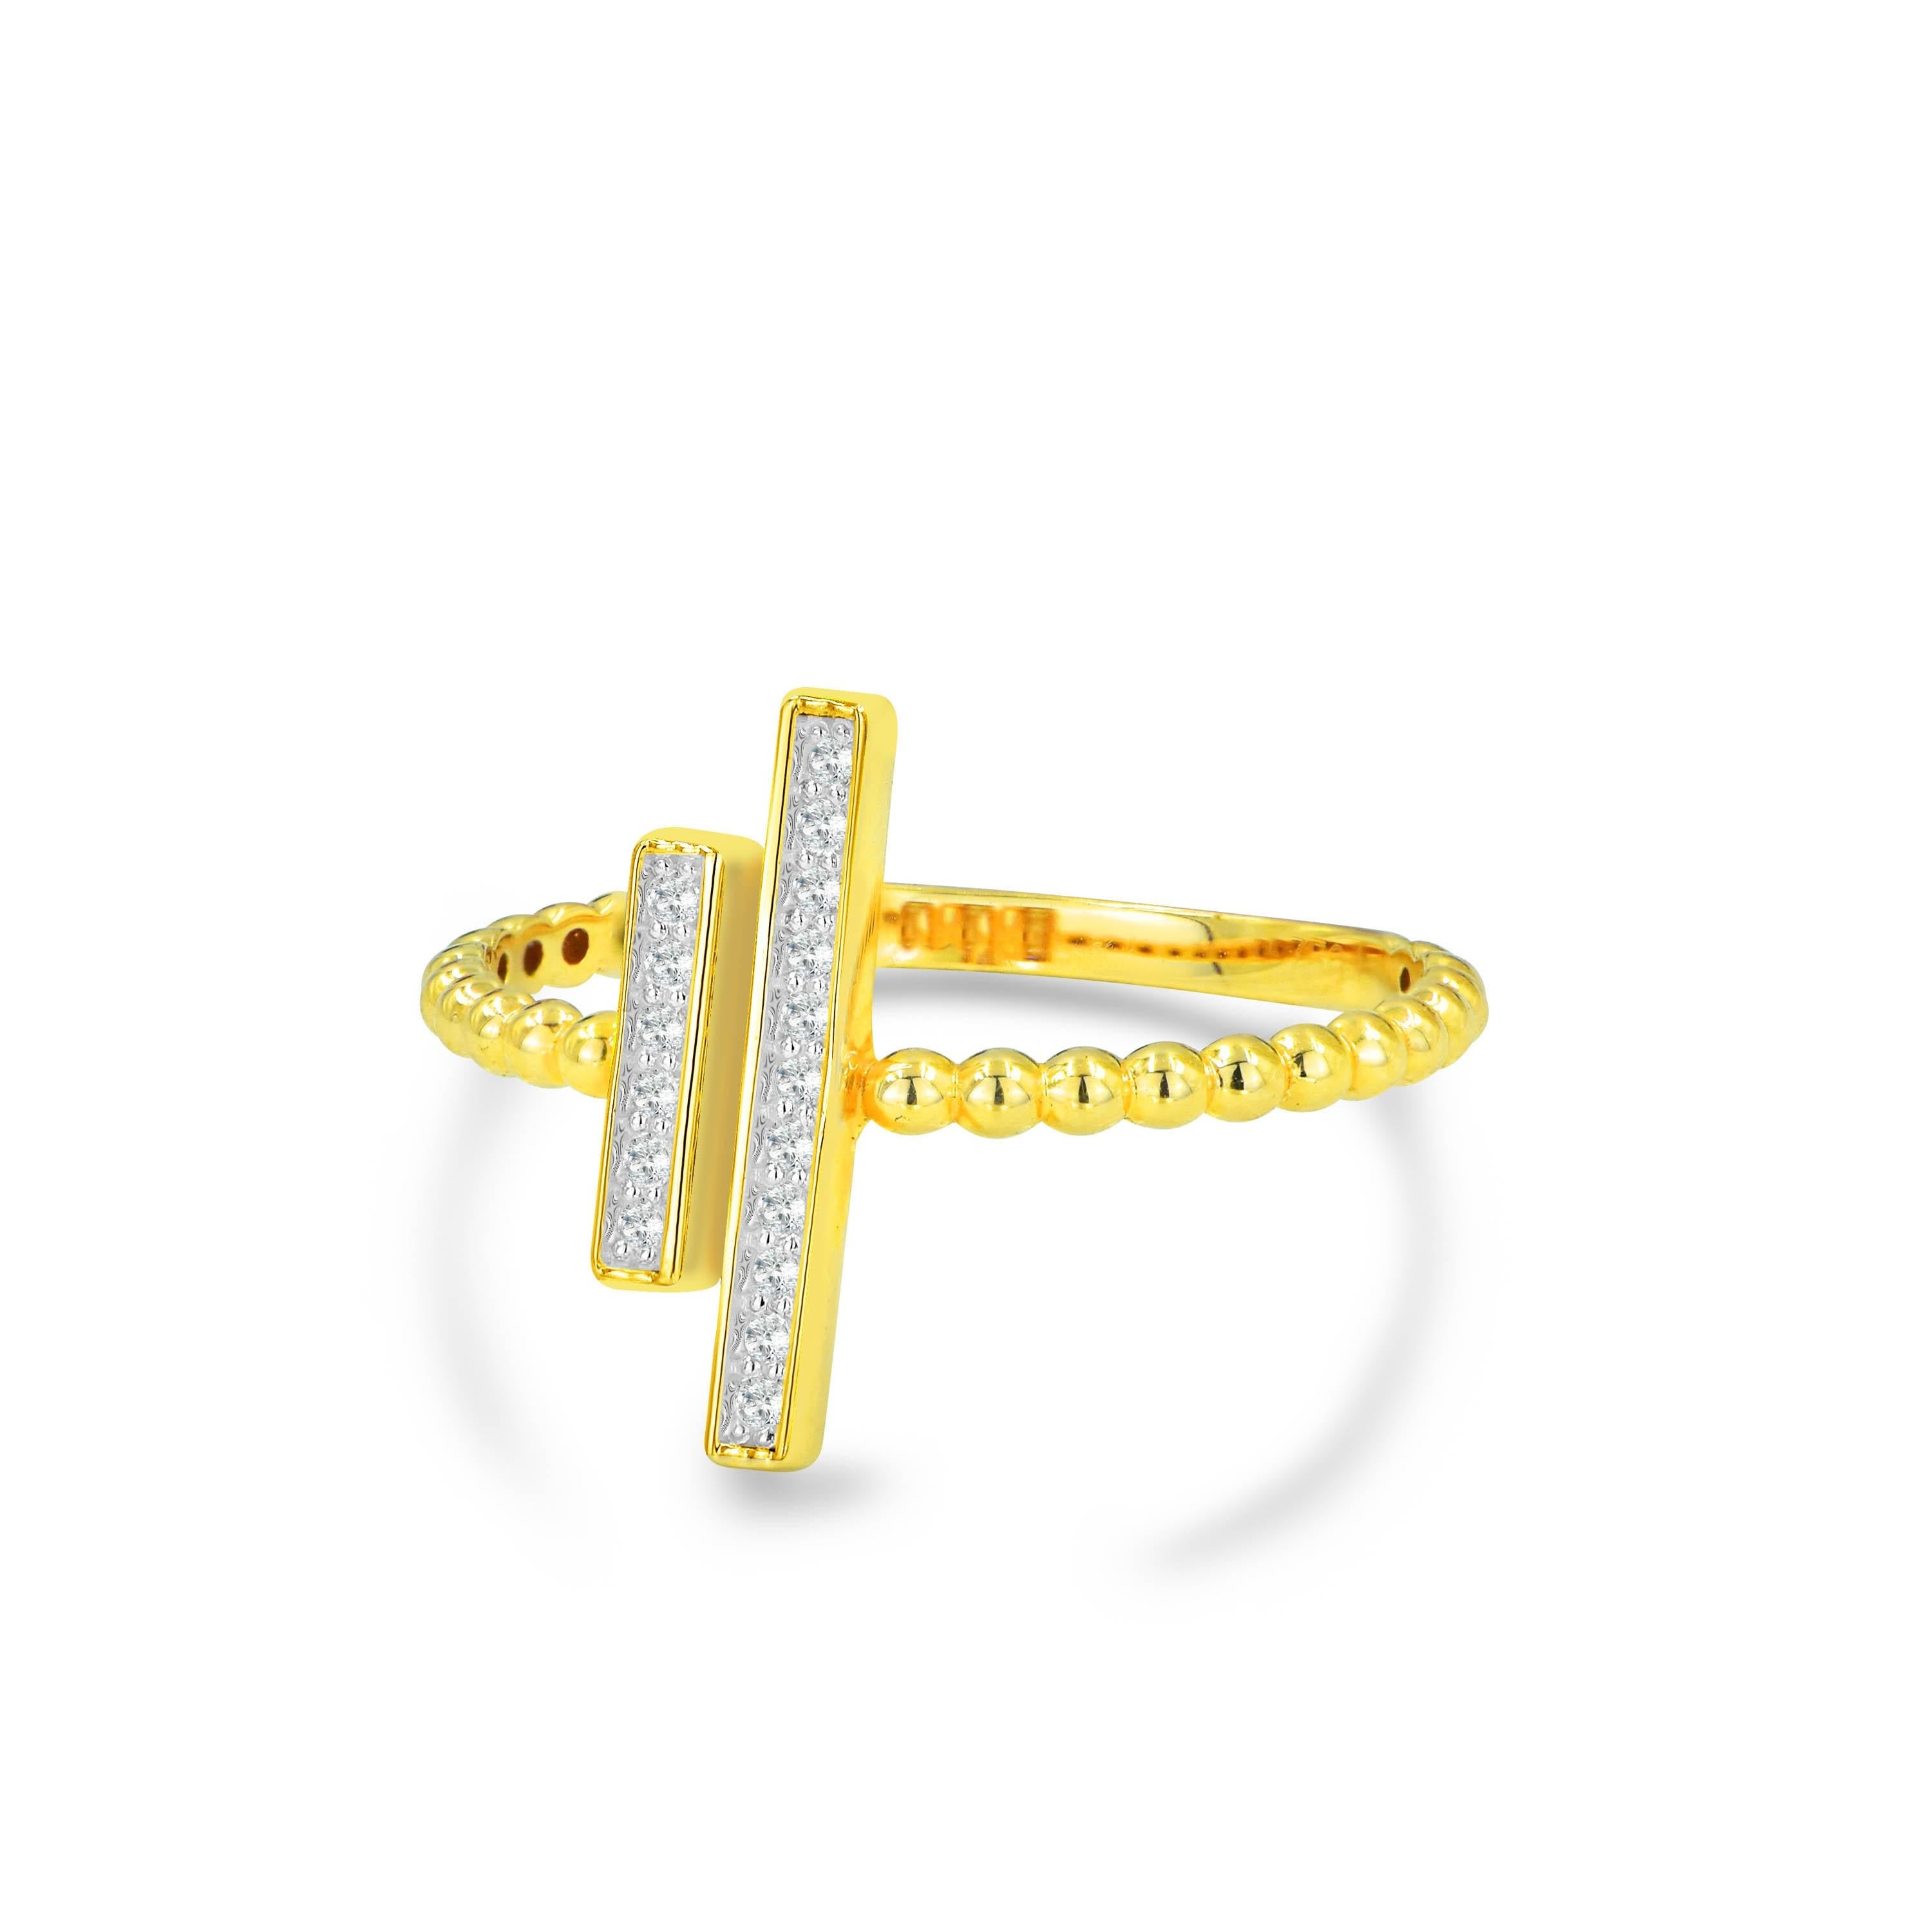 For Sale:  14k Gold Pave Diamond Two Bar Ring Parallel Bar Ring Diamond Bar Ring 5